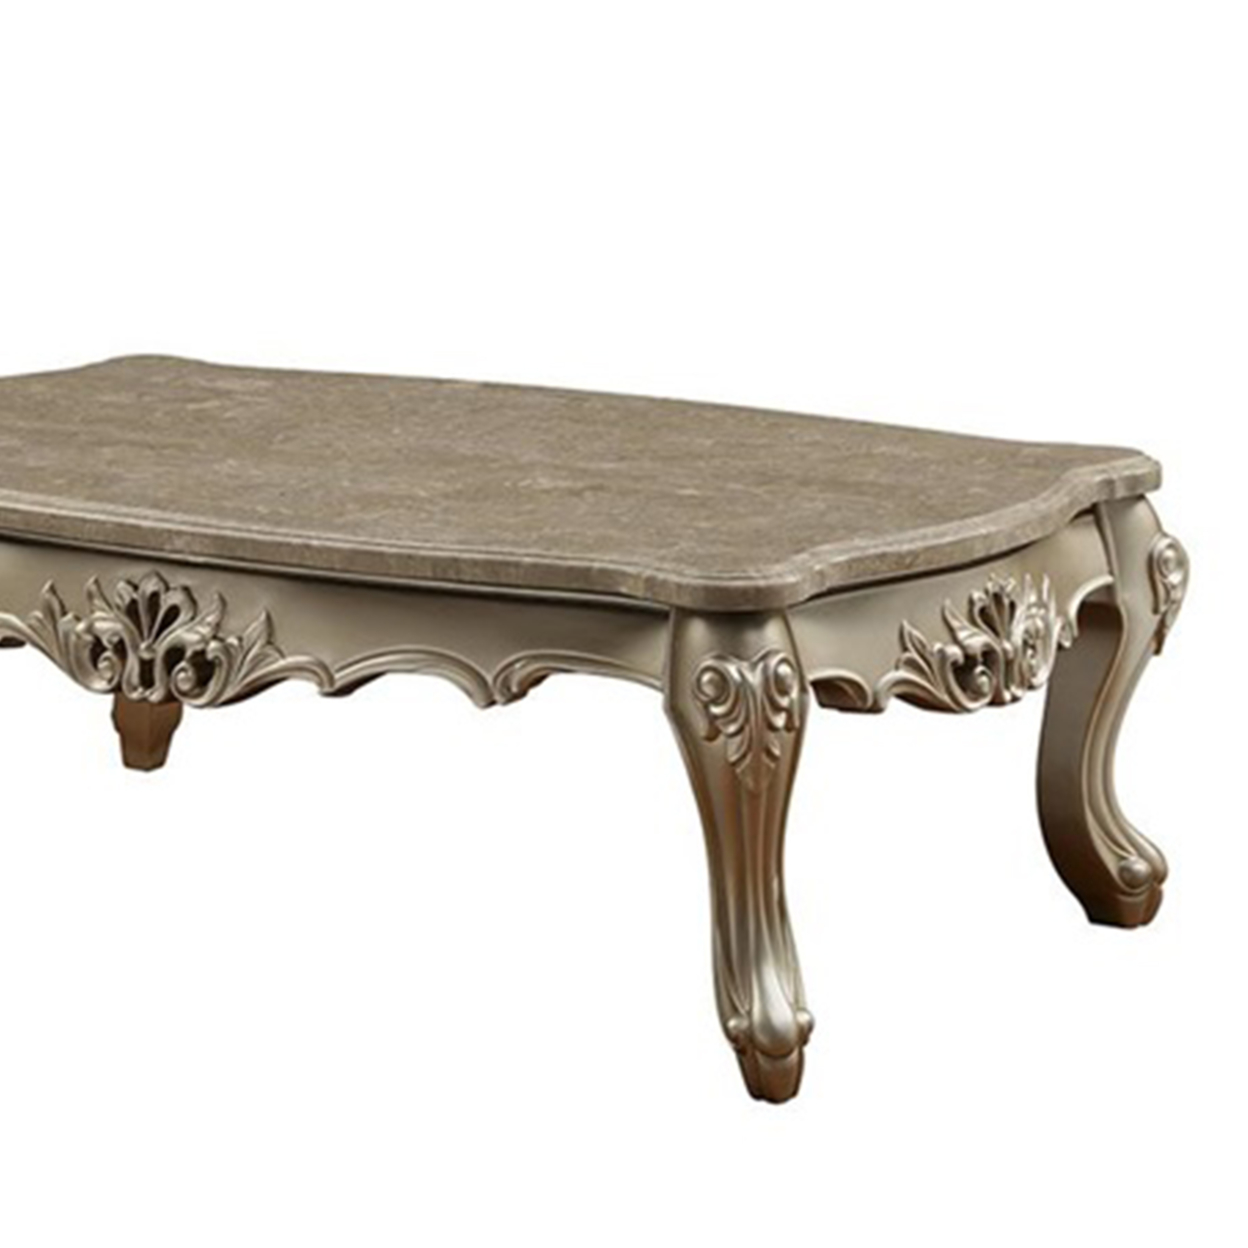 Marble Top Wooden Coffee Table With Queen Anne Style Legs, Champagne Gold- Saltoro Sherpi